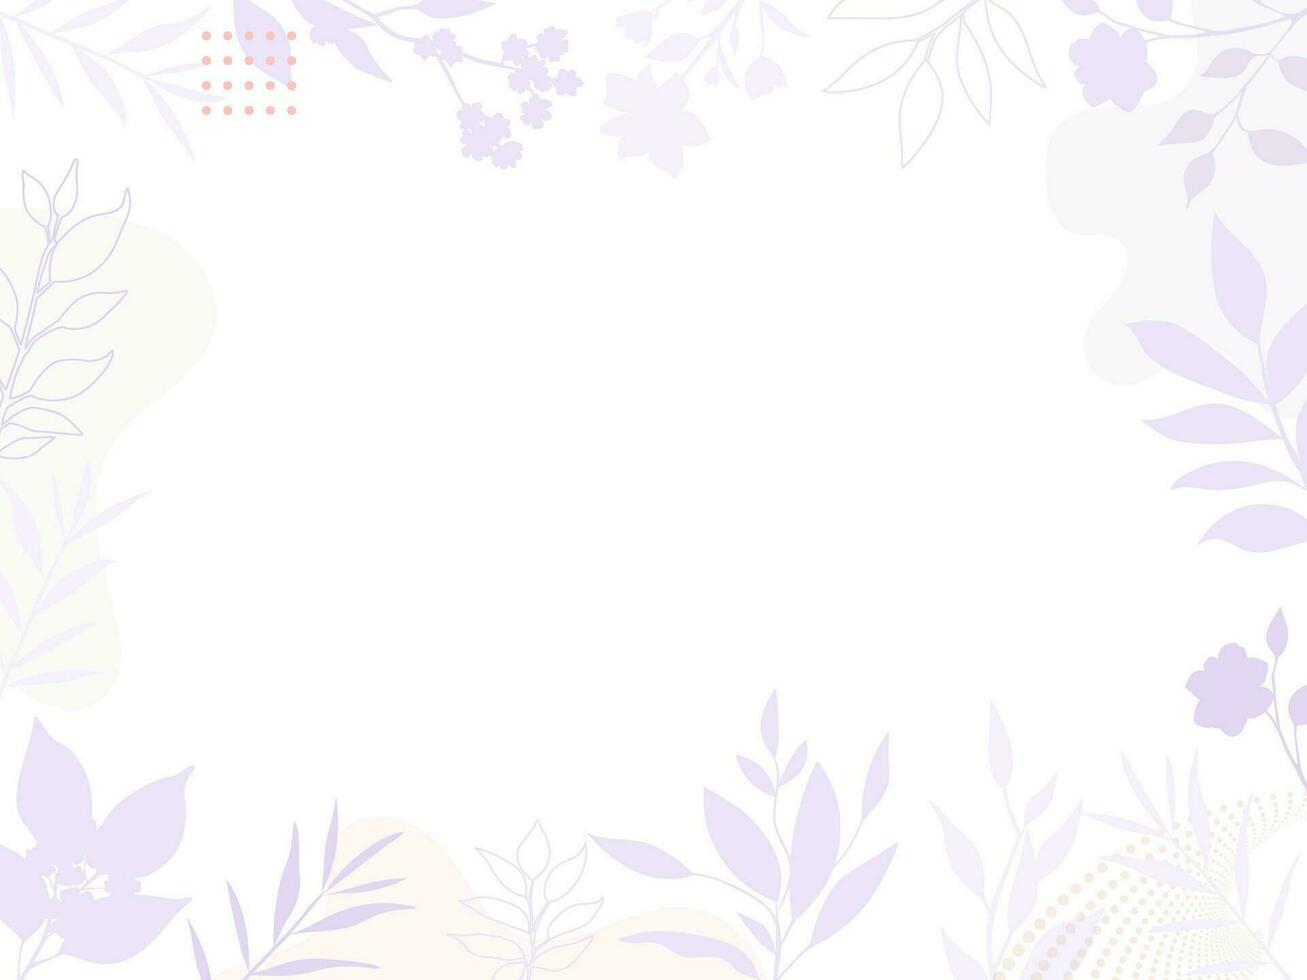 abstract template with plants and flowers, bauhaus, floral background with geometric shapes vector